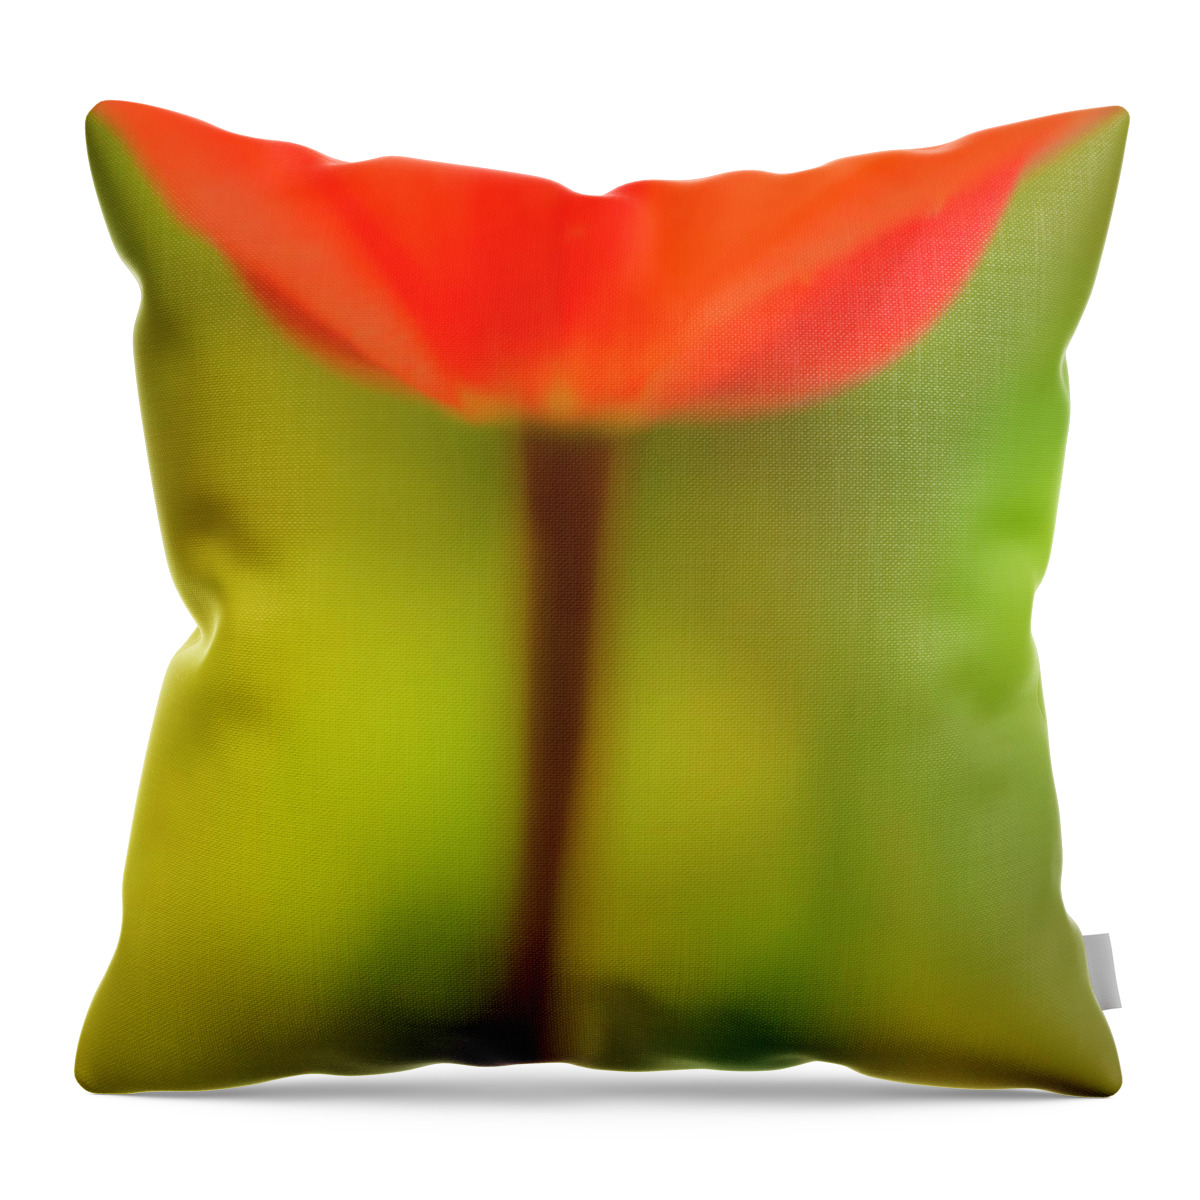 Tulip Throw Pillow featuring the photograph Tulip by Kathy Paynter